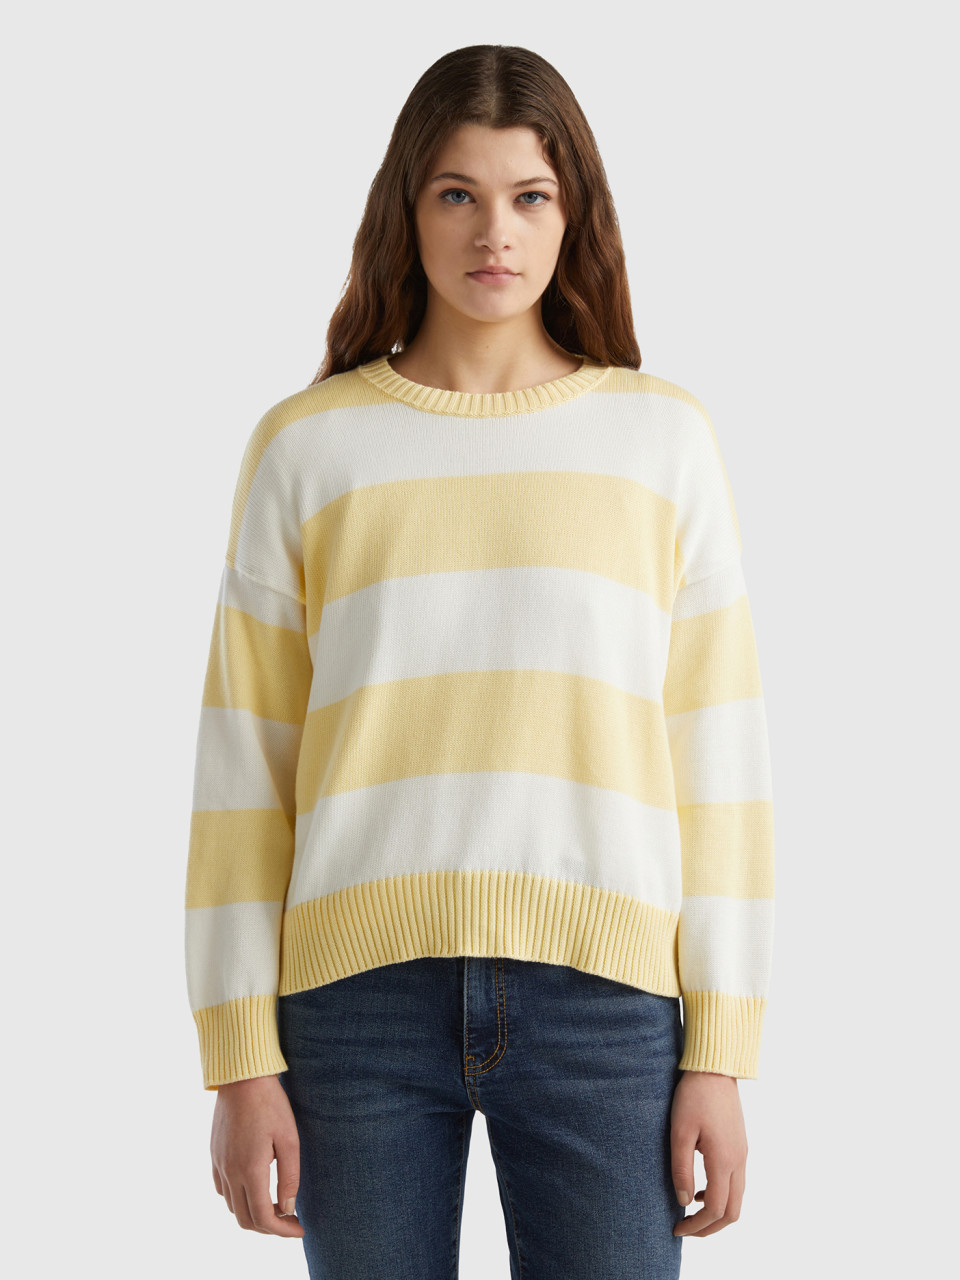 Benetton, Striped Sweater In Tricot Cotton, Yellow, Women